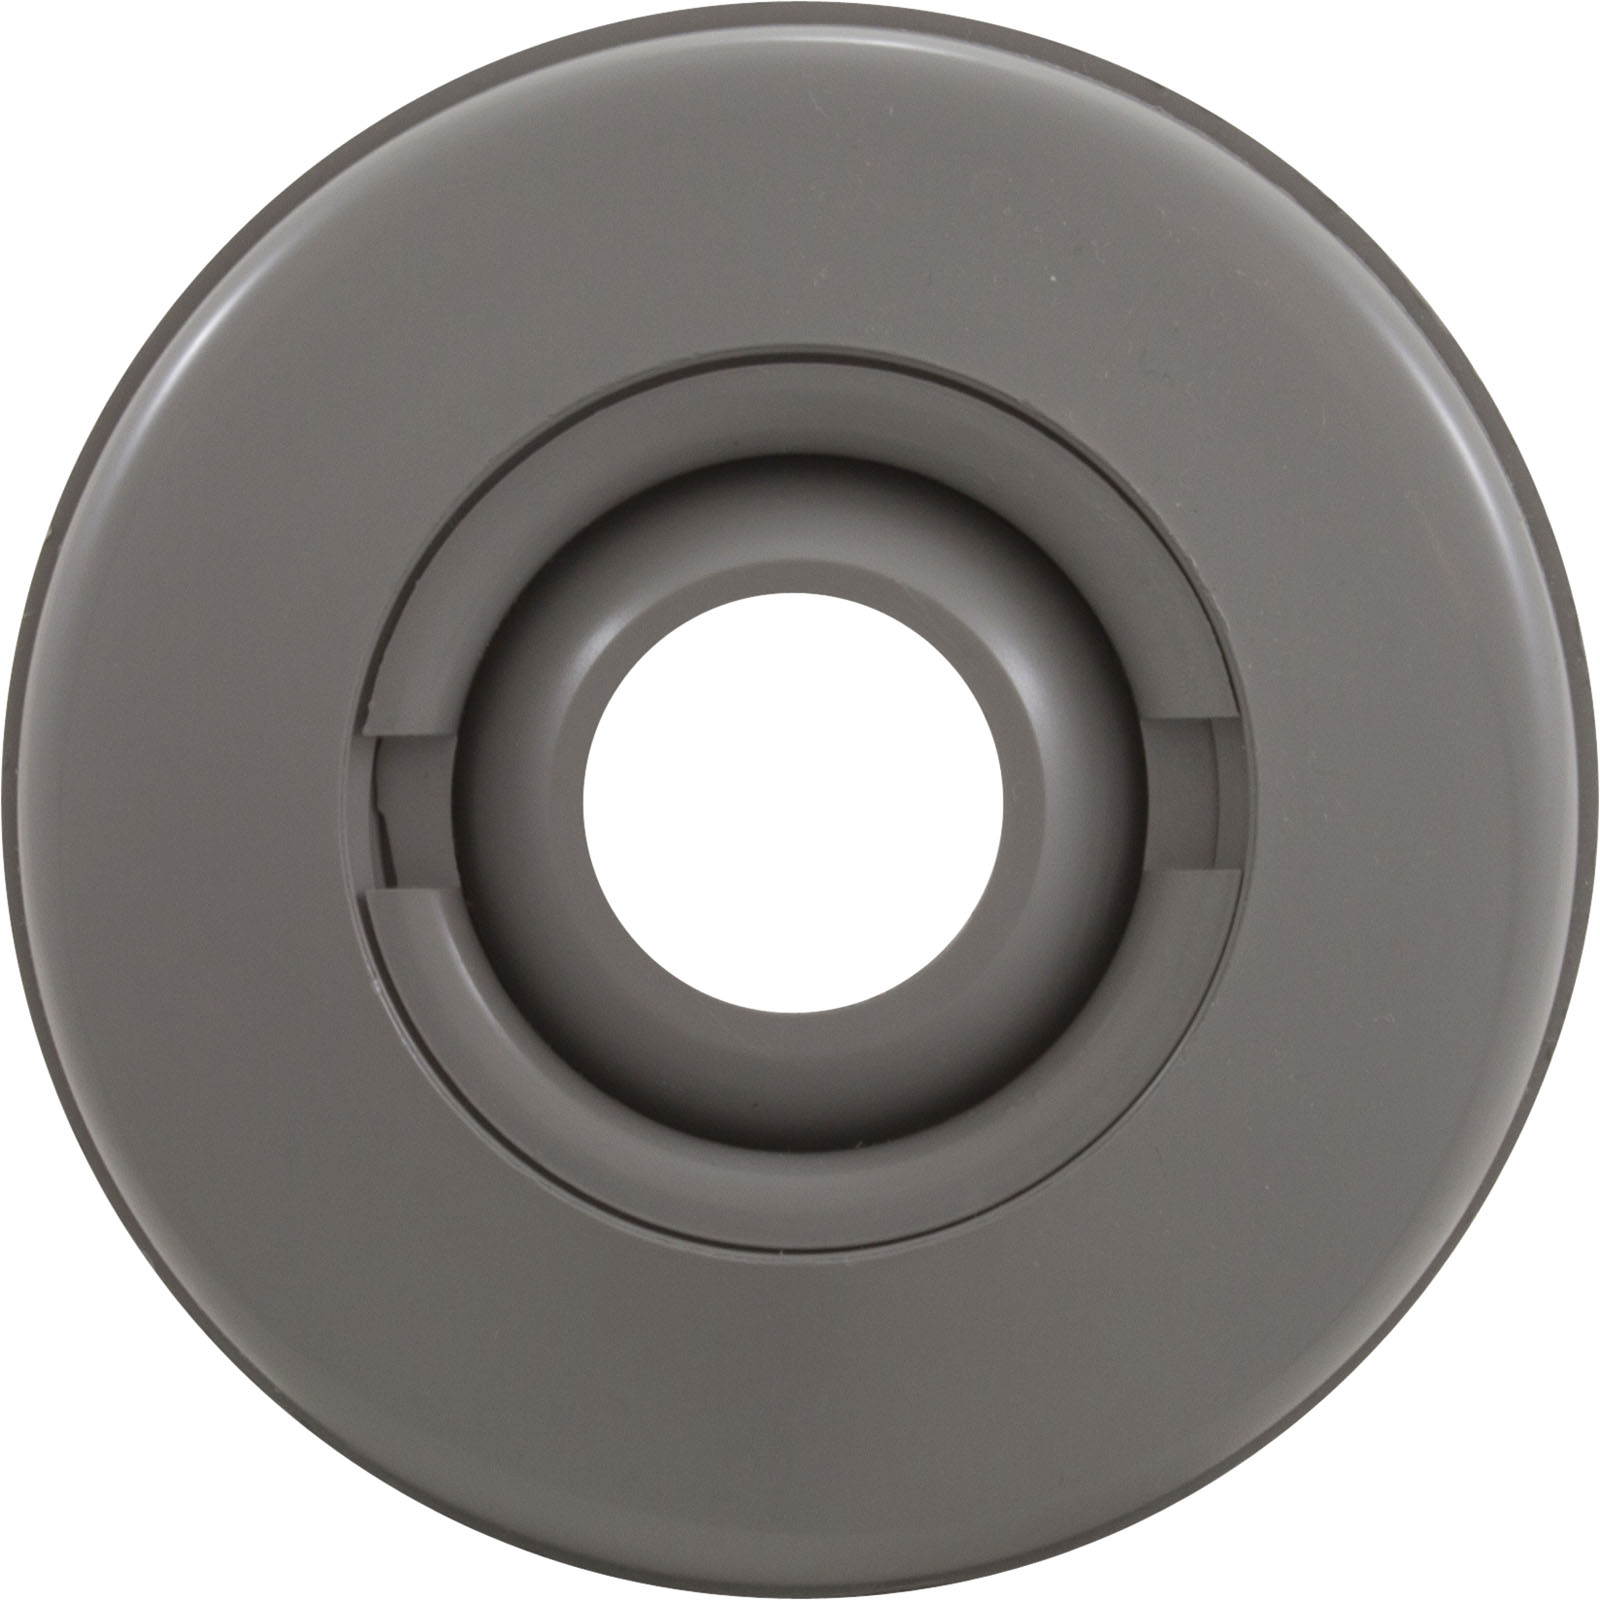 Picture of 25523-701-000 Fiberglass Wall Fitting With Eyeball Gray